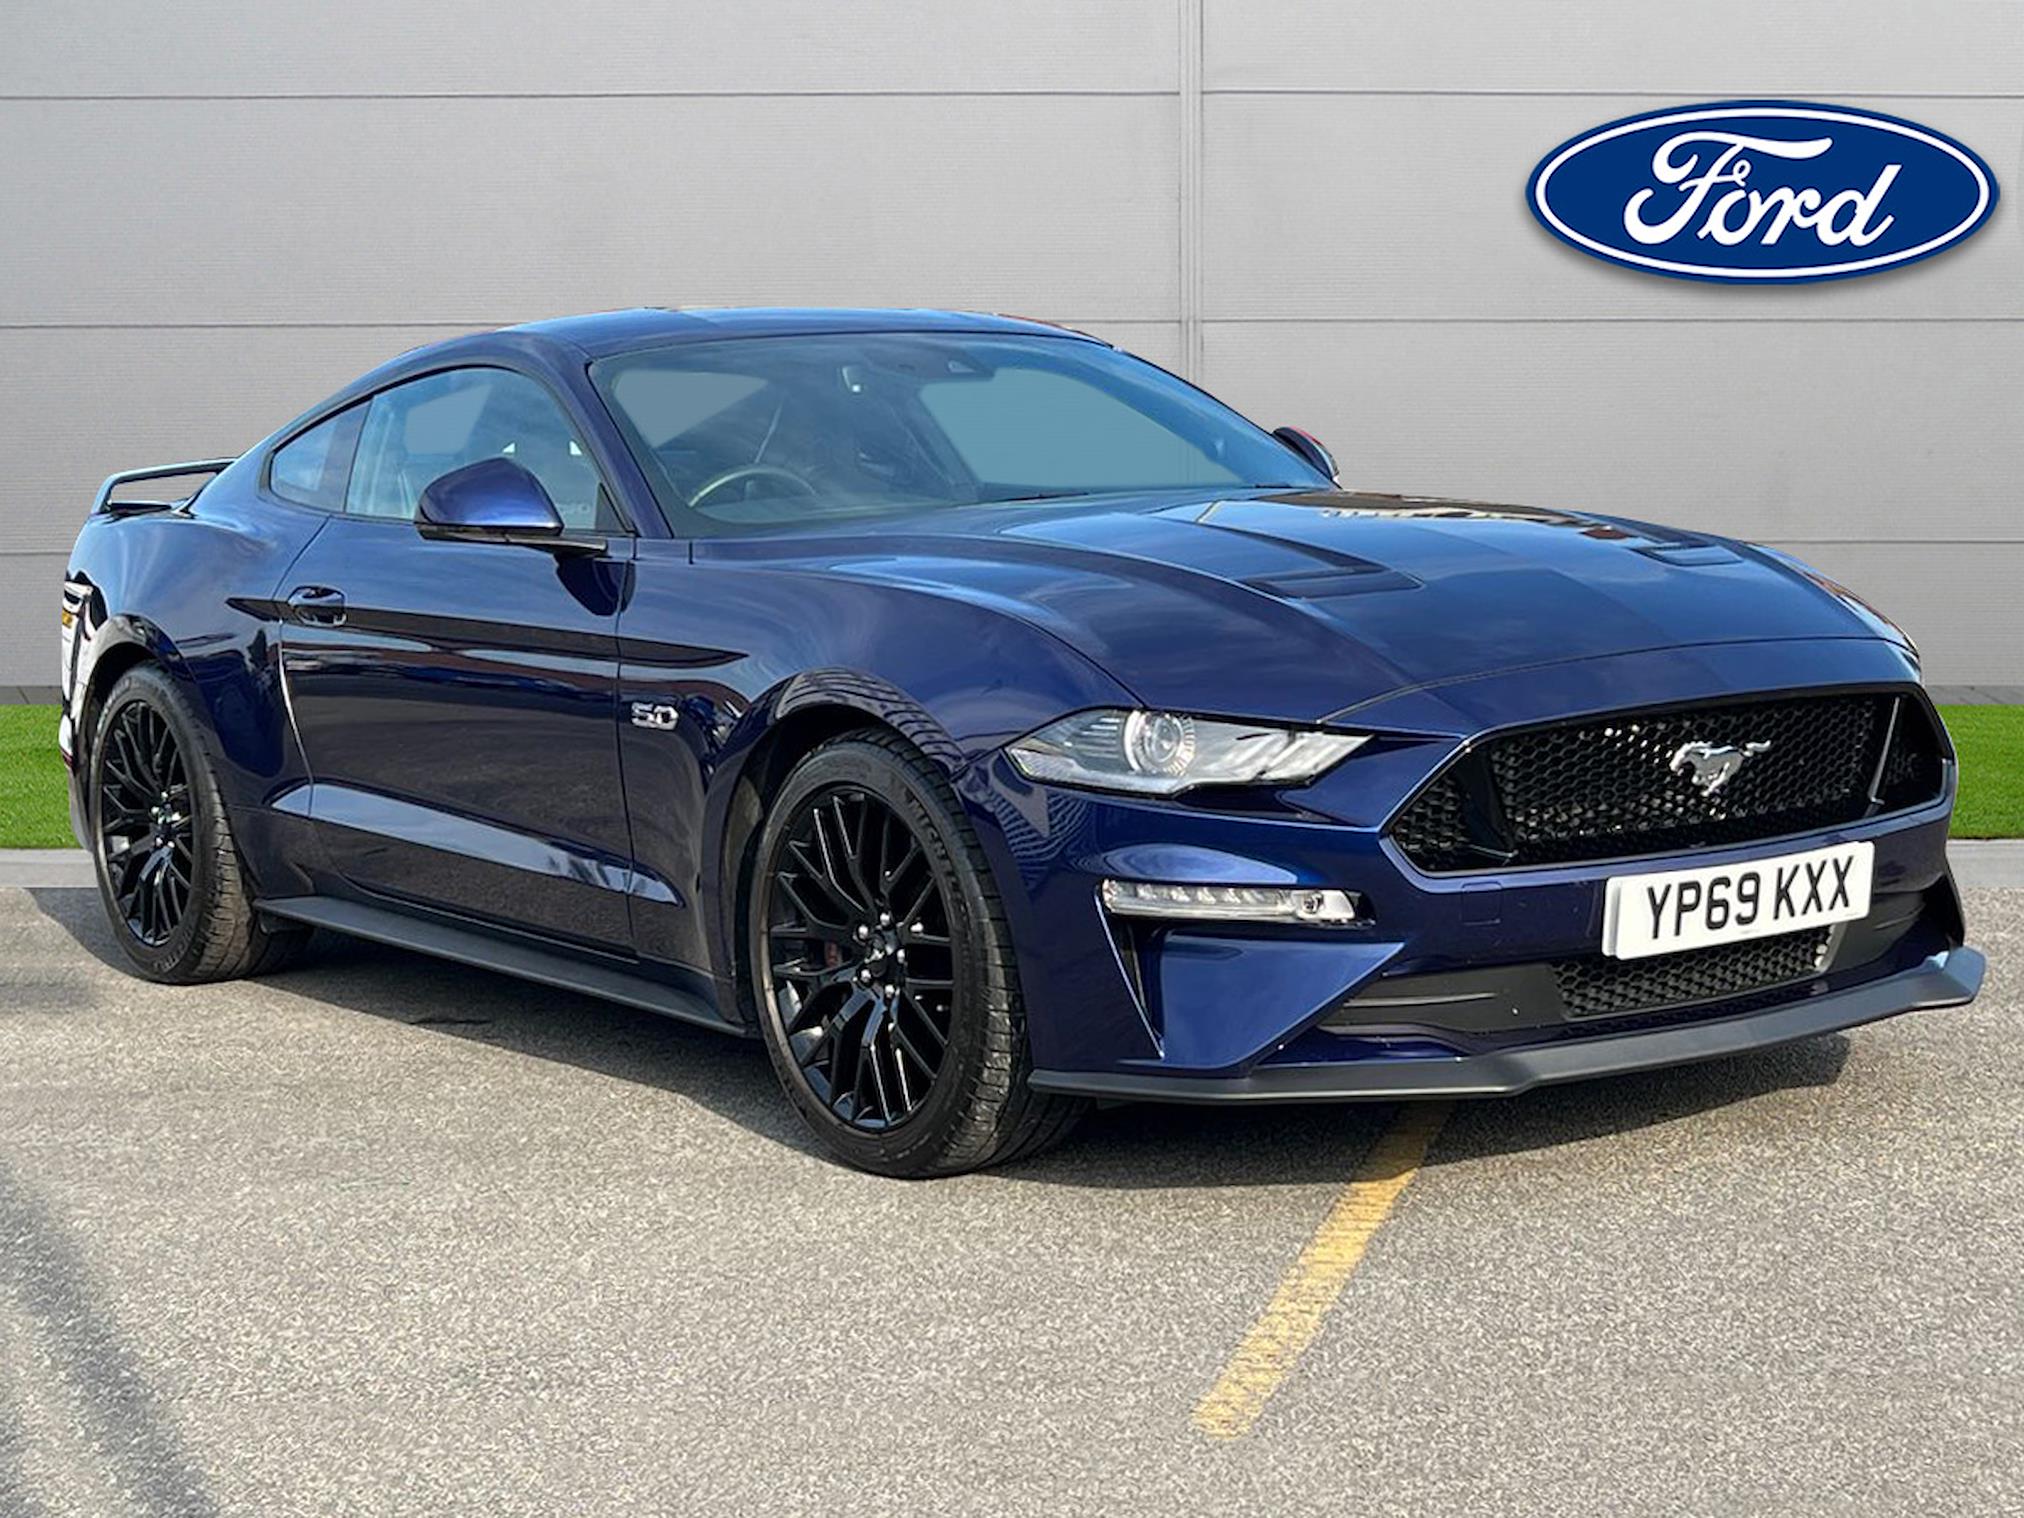 Used FORD MUSTANG 5.0 V8 GT [Custom Pack 2] 2dr 2019 | Lookers